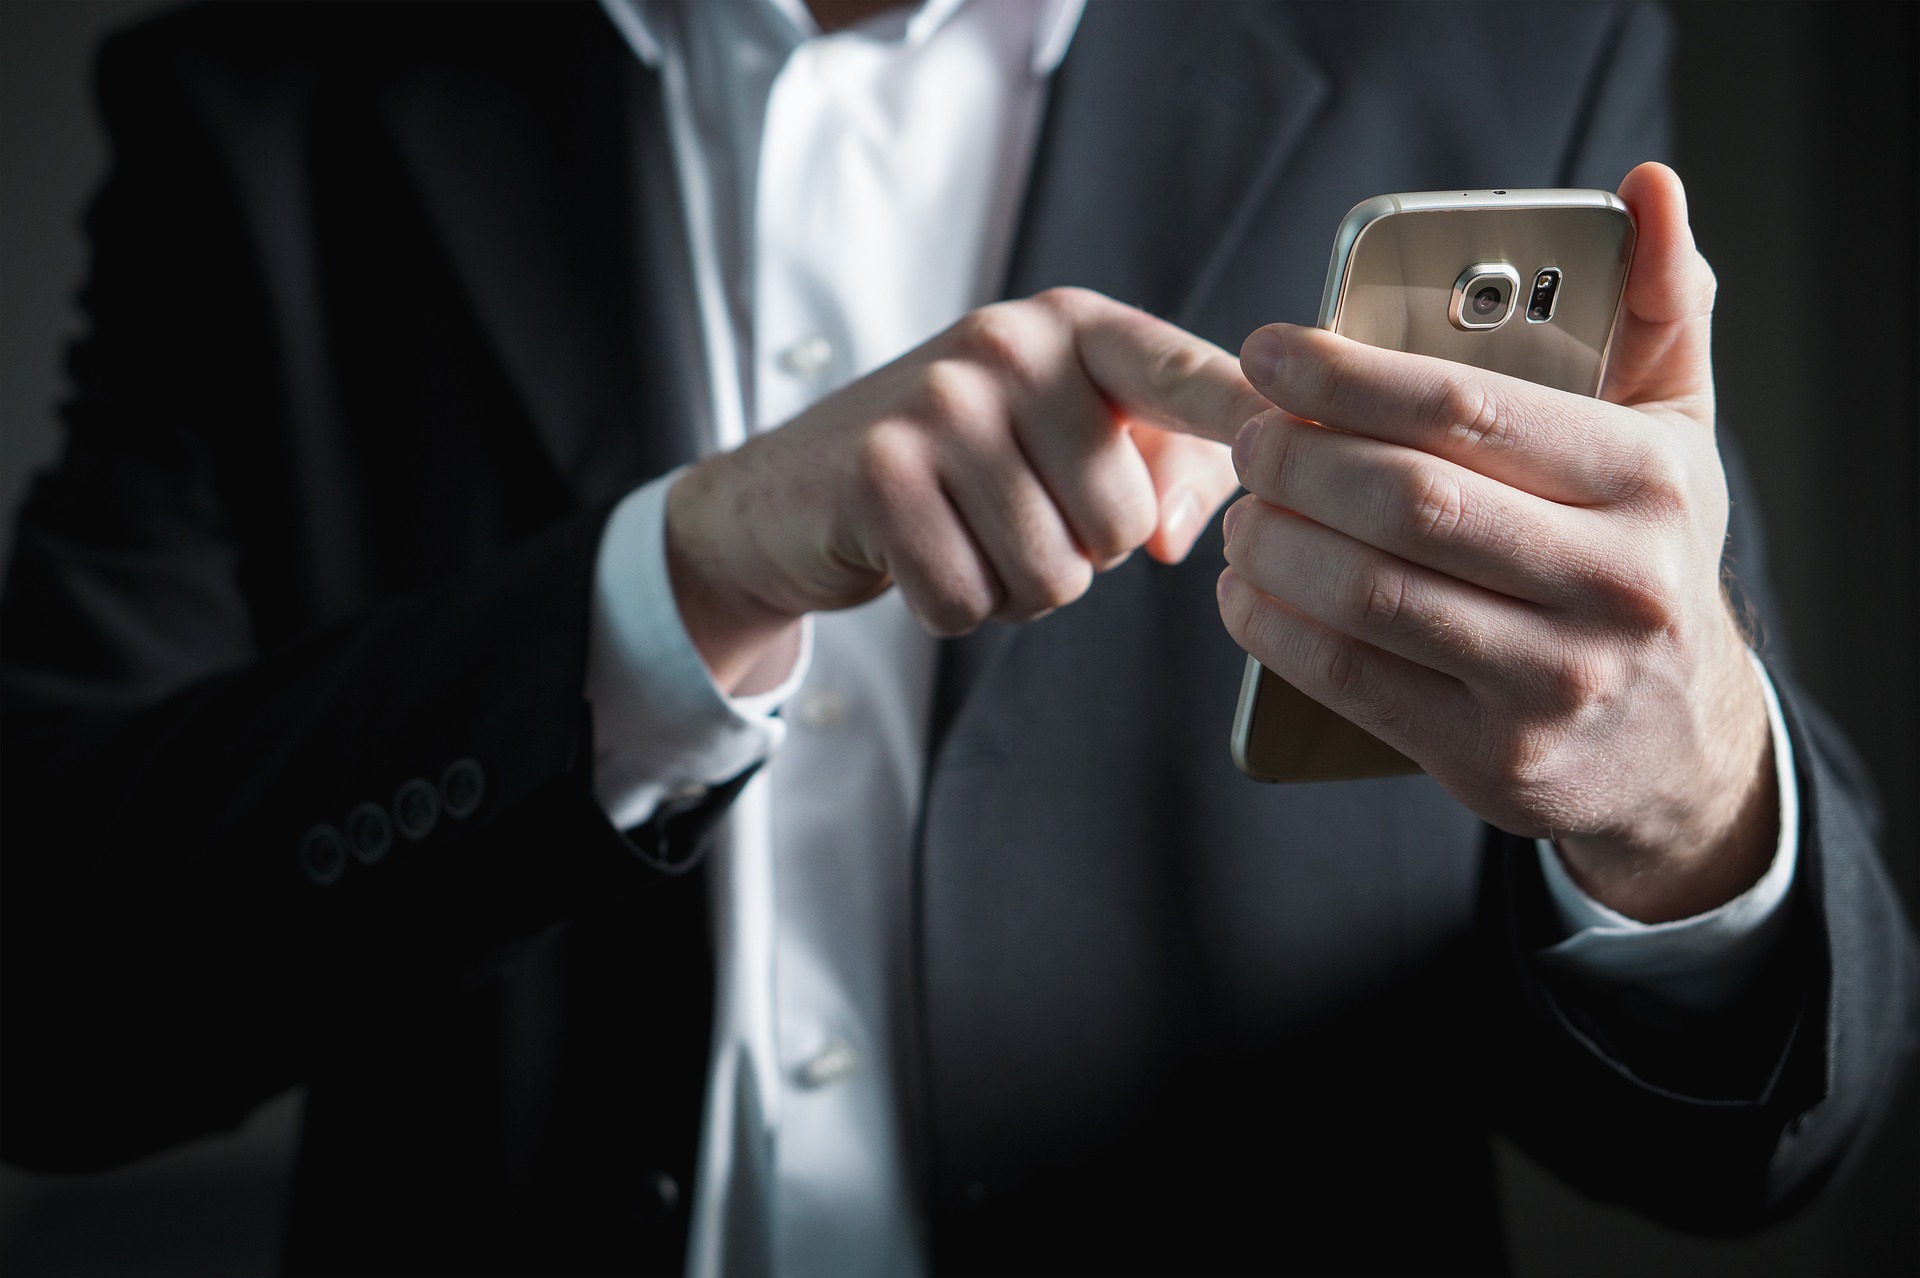 A man in a suit uses a smartphone